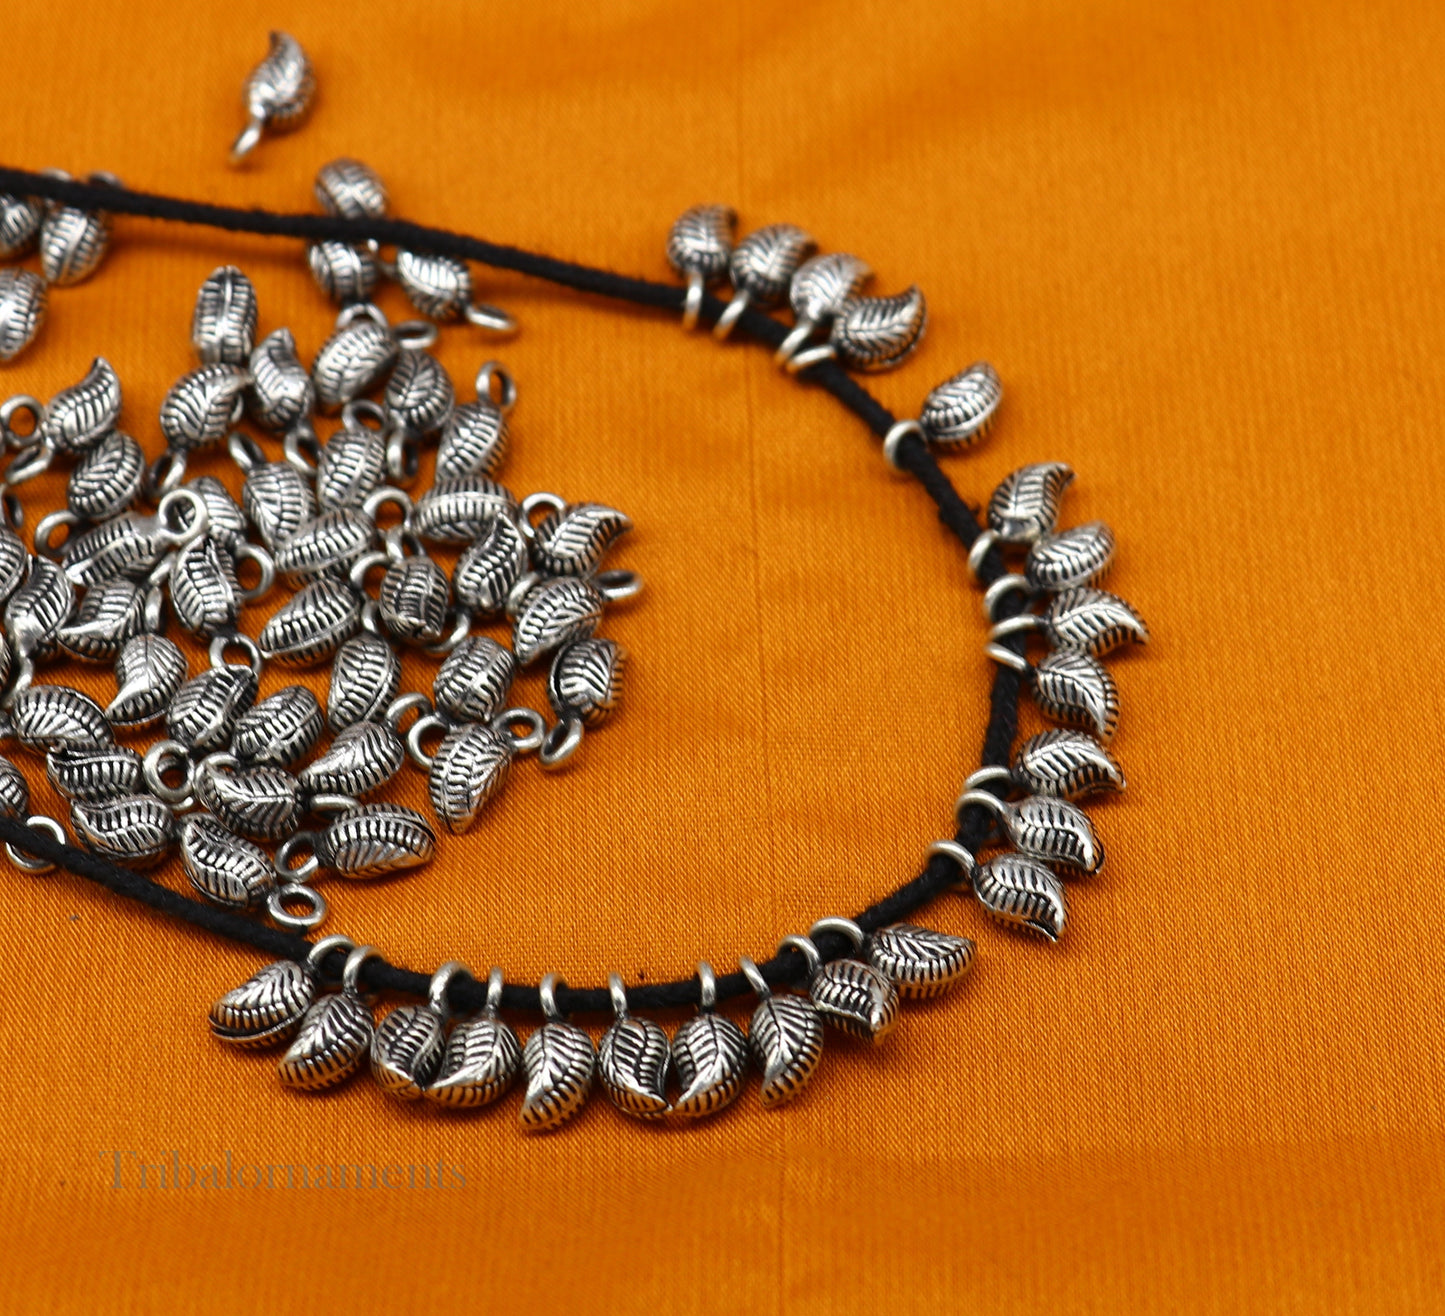 Lot 20 pieces jingling bells vintage mango design 925 sterling silver beads or hanging drops for custom jewelry making lose beads bd14 - TRIBAL ORNAMENTS